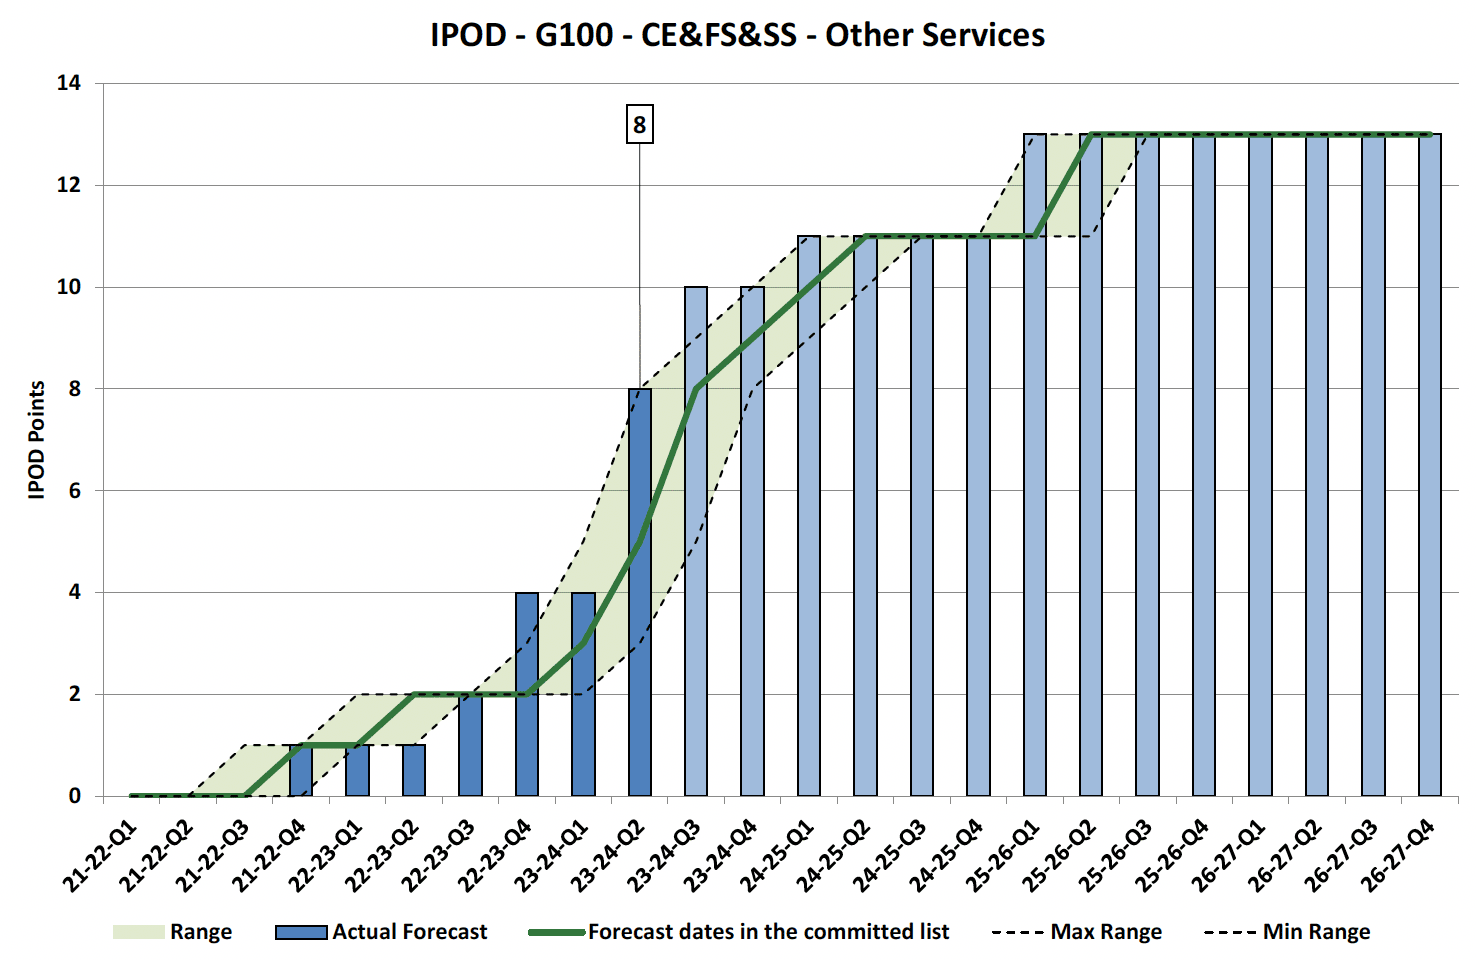 Chart showing IPOD points achieved or forecast for Project Acceptance milestone against target range for Other Services Projects in CE&FS&SS Portfolio